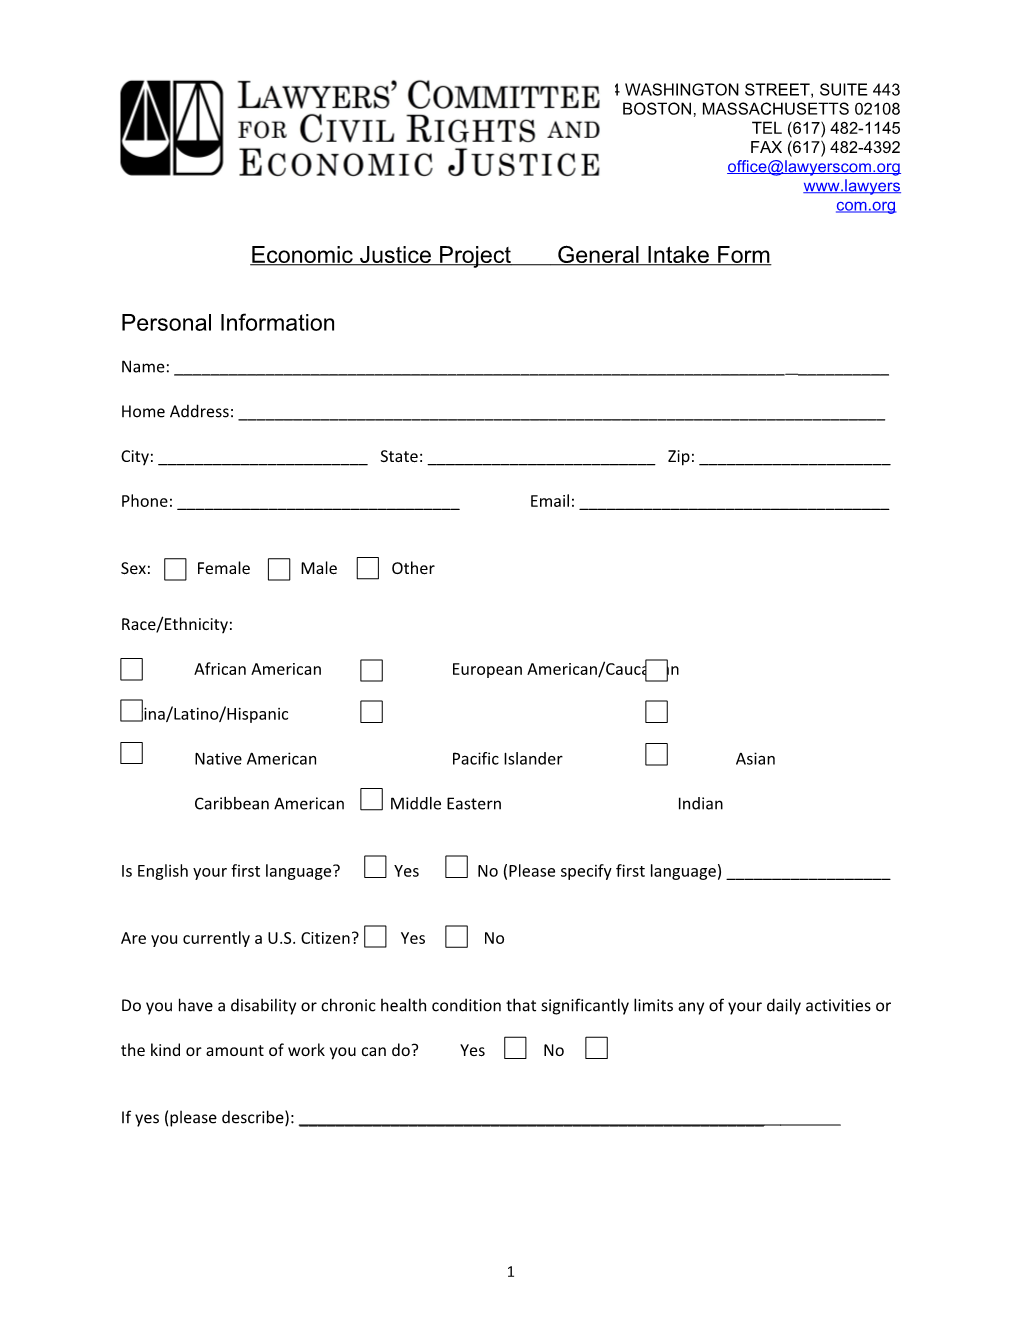 Economic Justice Project General Intake Form